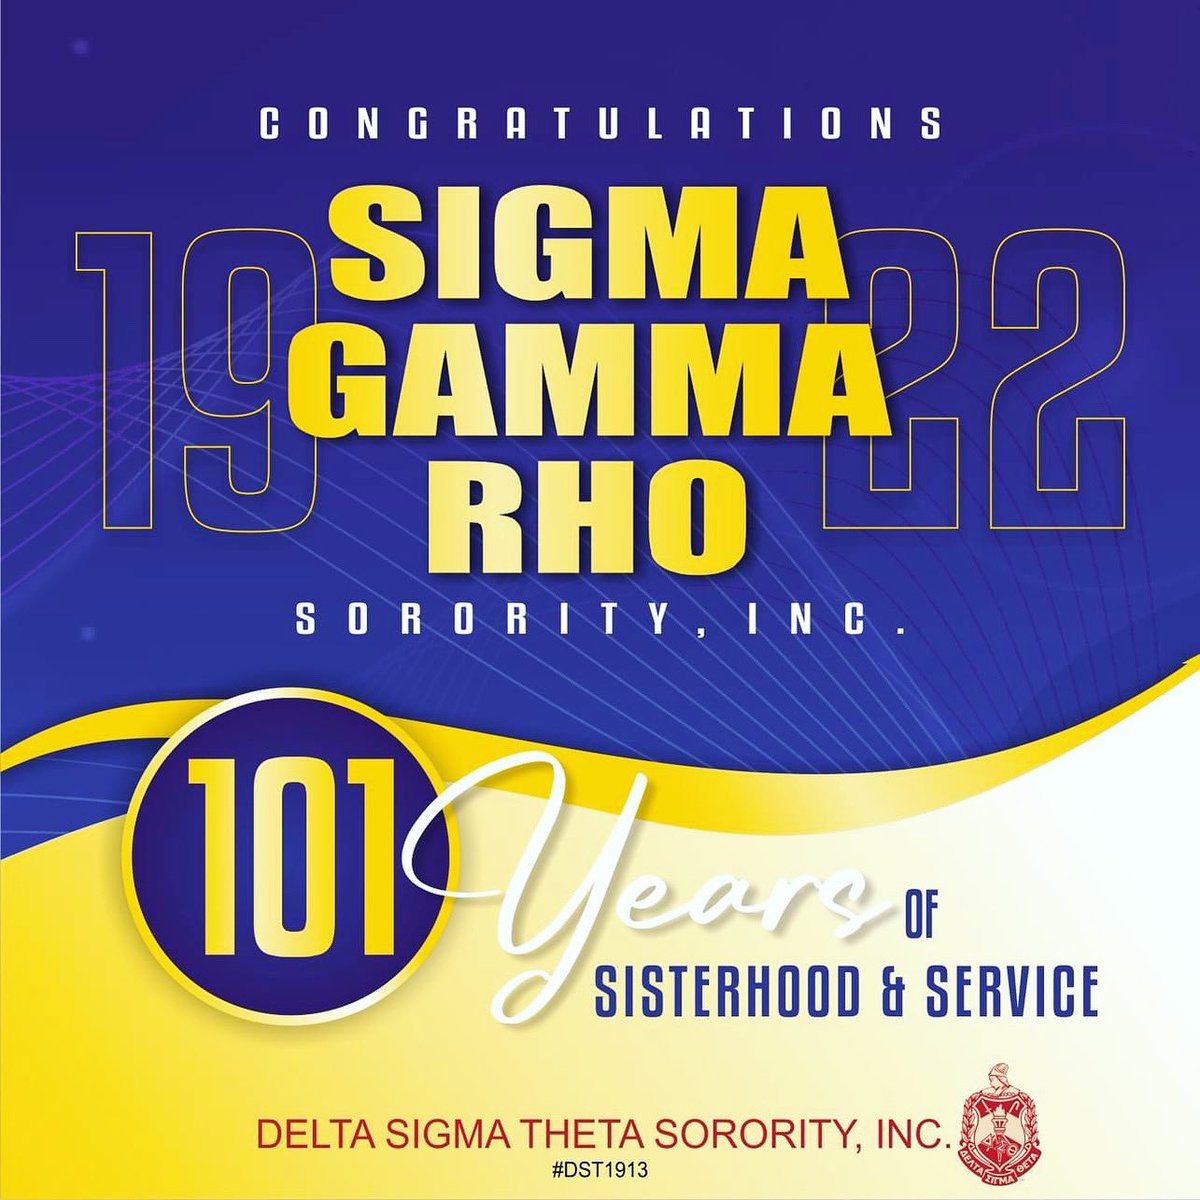 Congratulations on celebrating 101 years of unwavering service!

#SGRHO101 #DST1913 #PWCACDST